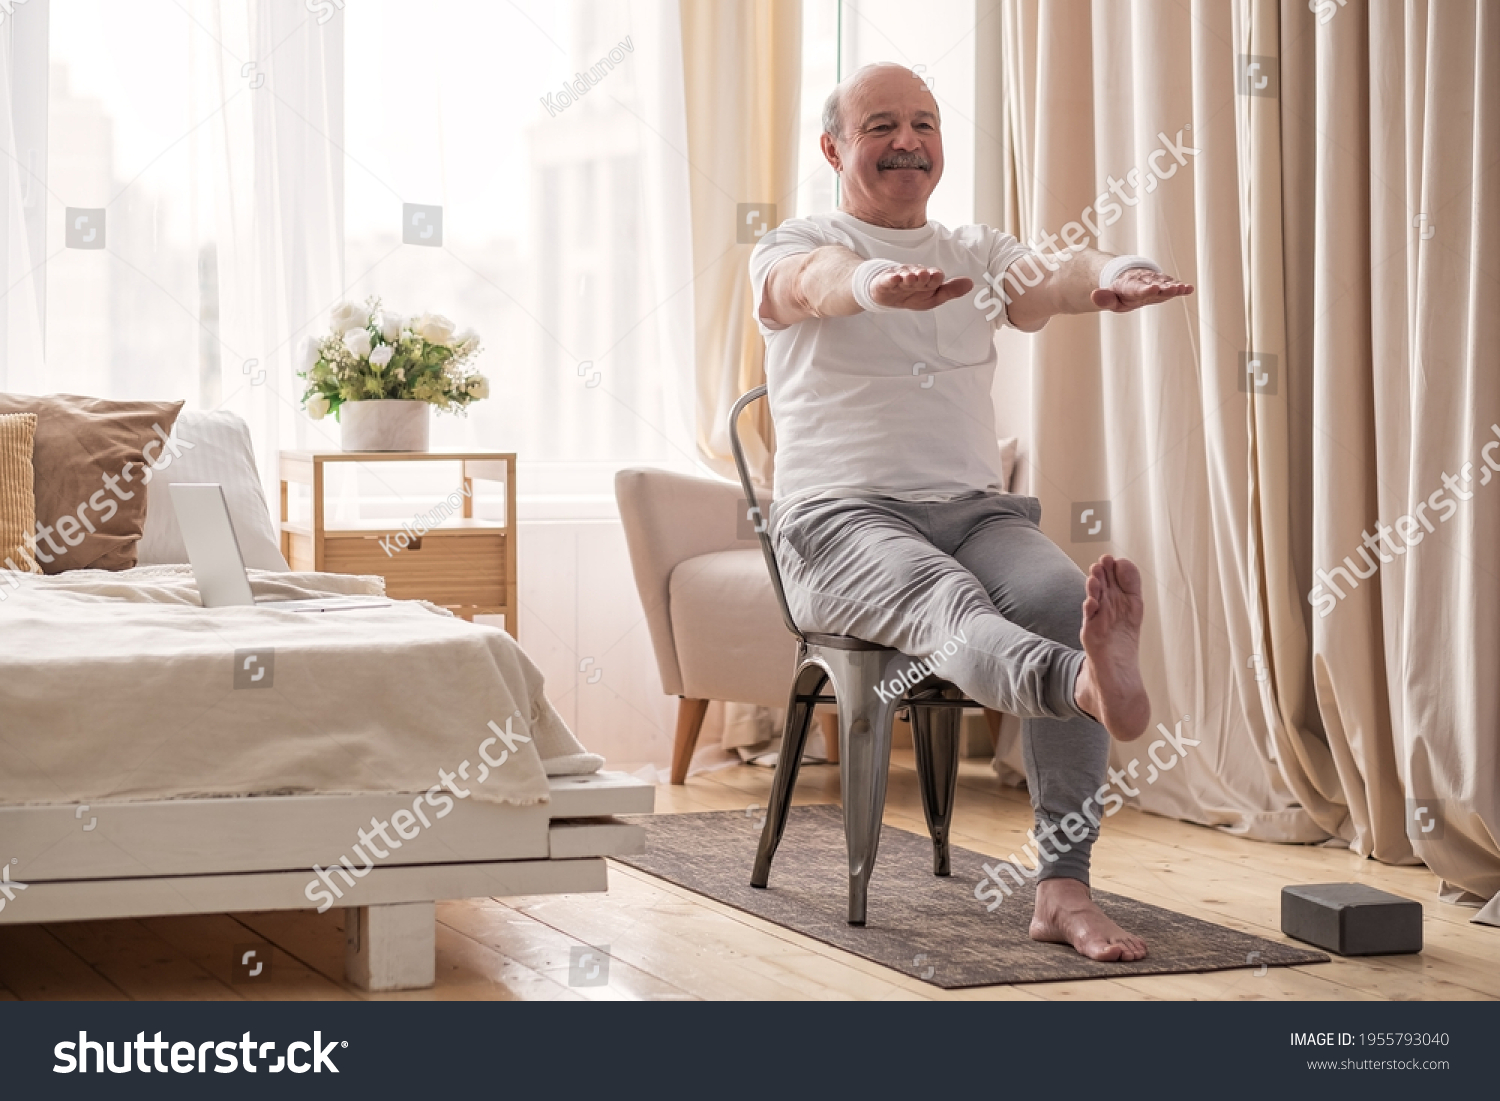 Elderly man practicing yoga asana or sport exercise for legs and hands on chair #1955793040